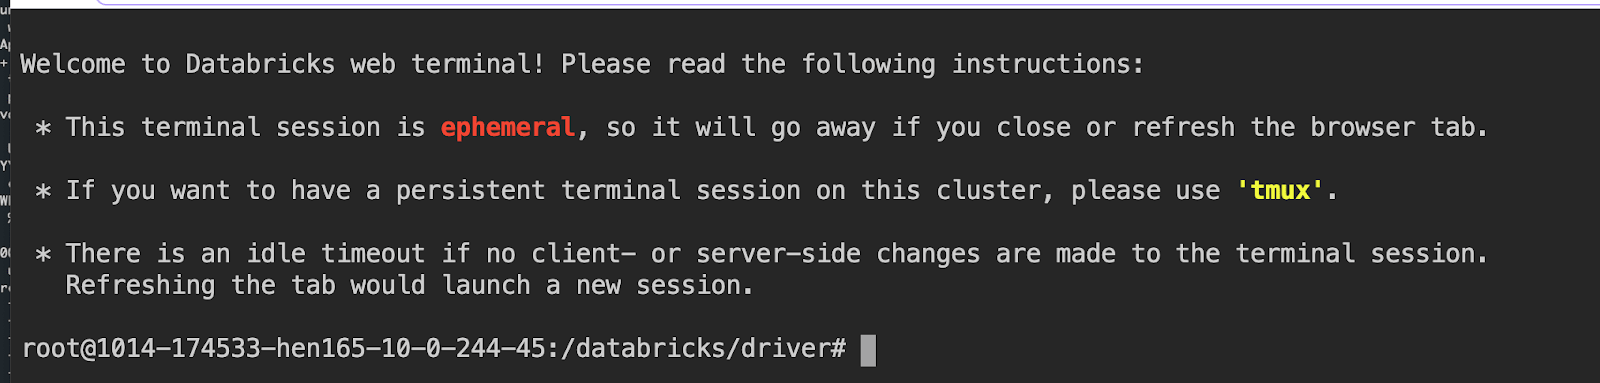 Databricks’ notebooks provides any member of the data team full access to the interactive shell and controlled access to the driver node of a cluster via a simple drop-down menu.